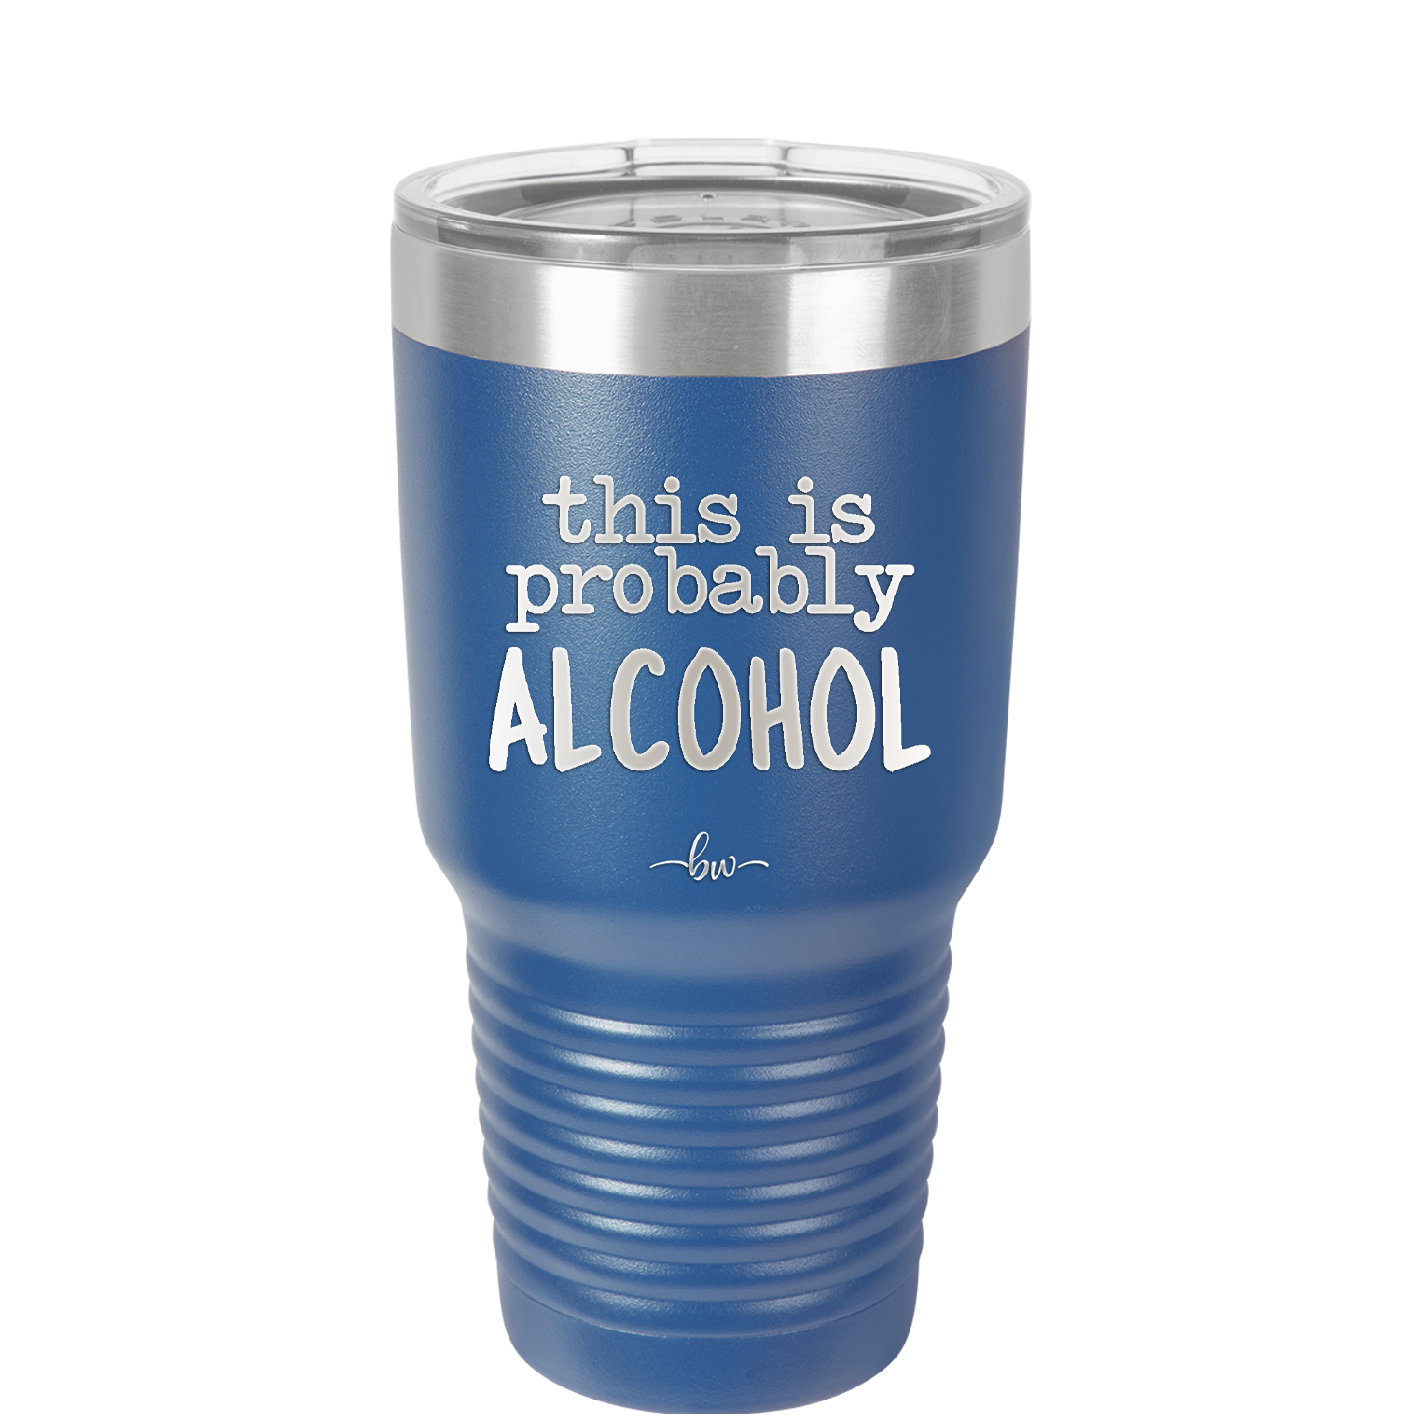 This is Probably Alcohol - Laser Engraved Stainless Steel Drinkware - 1002 -